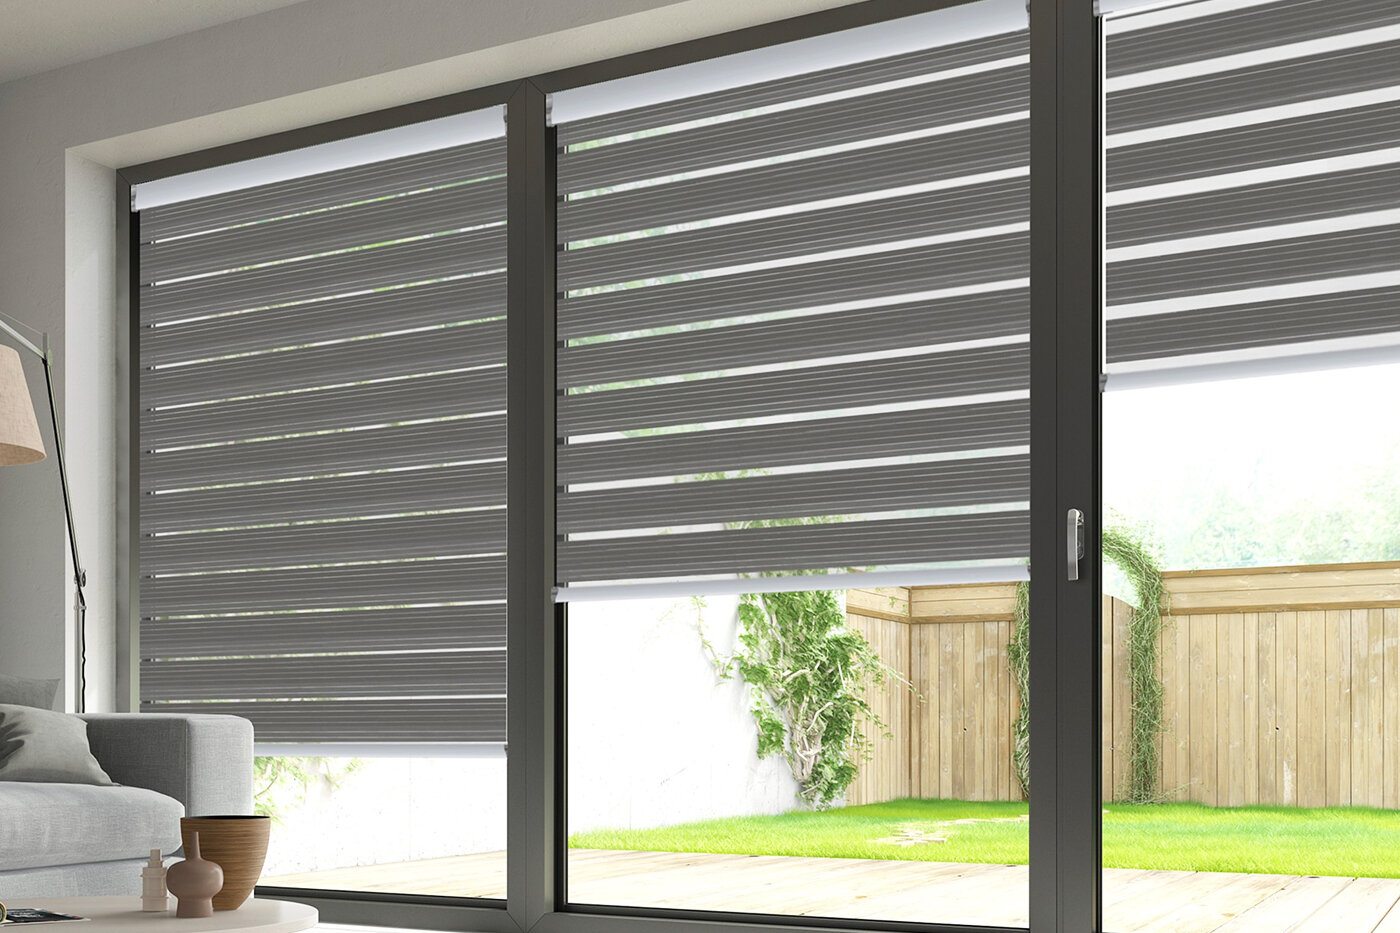 TopCat Window Blinds - UP TO 50% OFF - SALE ENDS SOON!